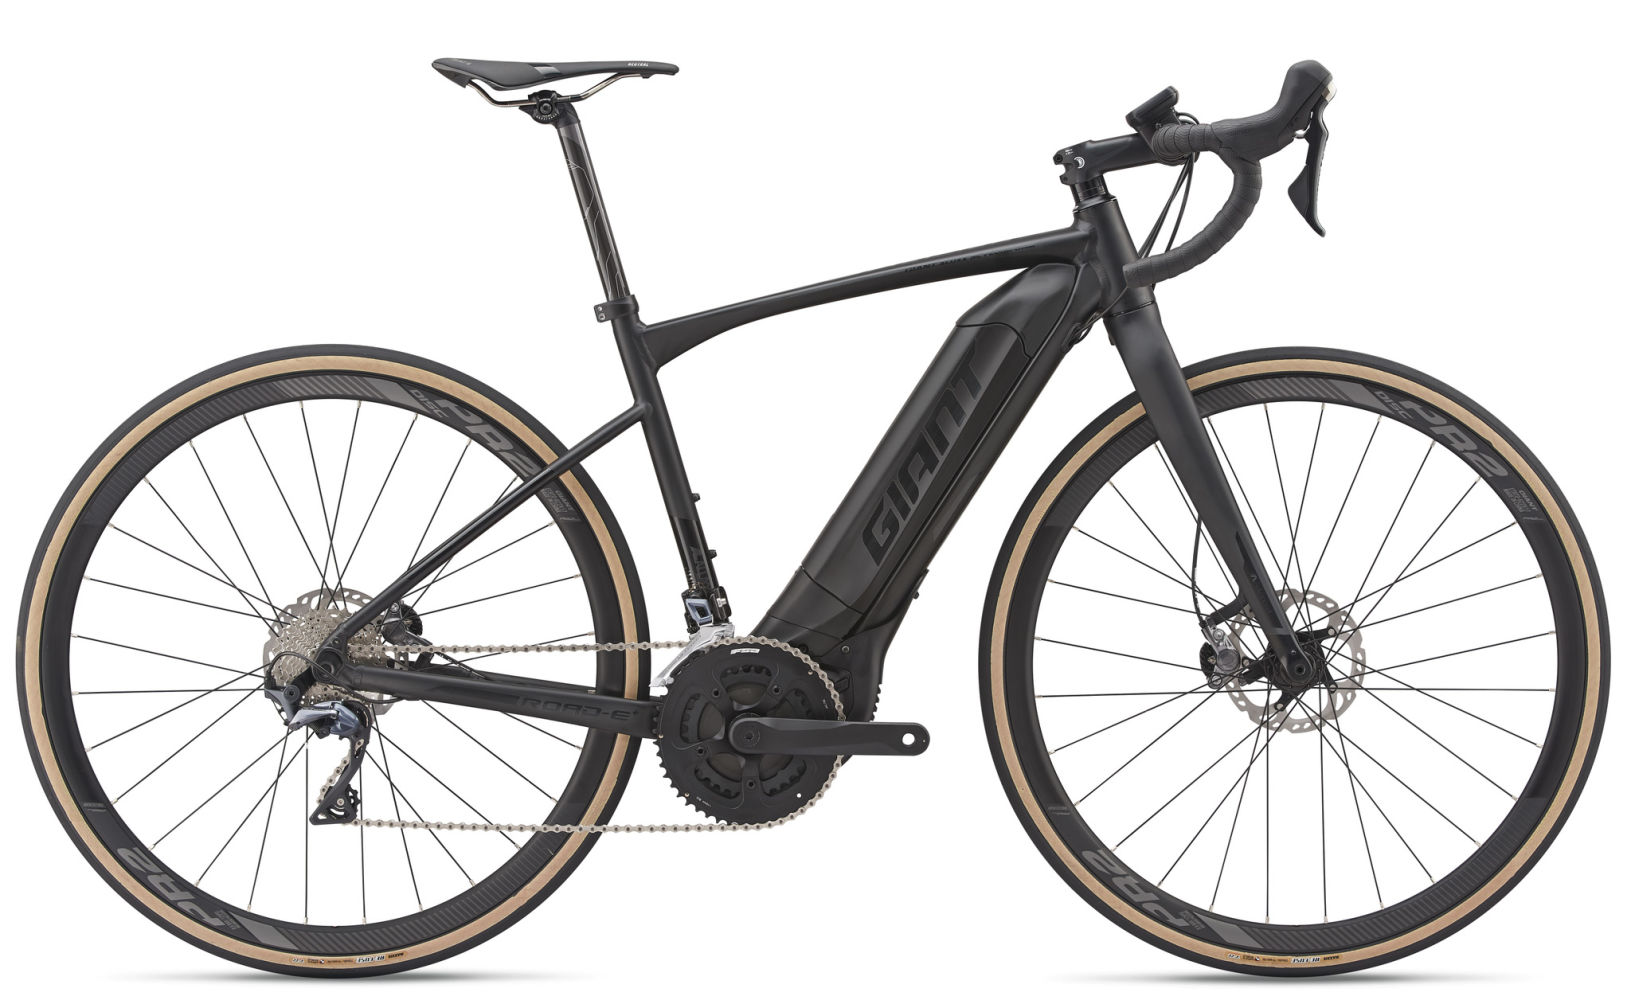 The Giant Road-e+1Pro retails for $4,400. 